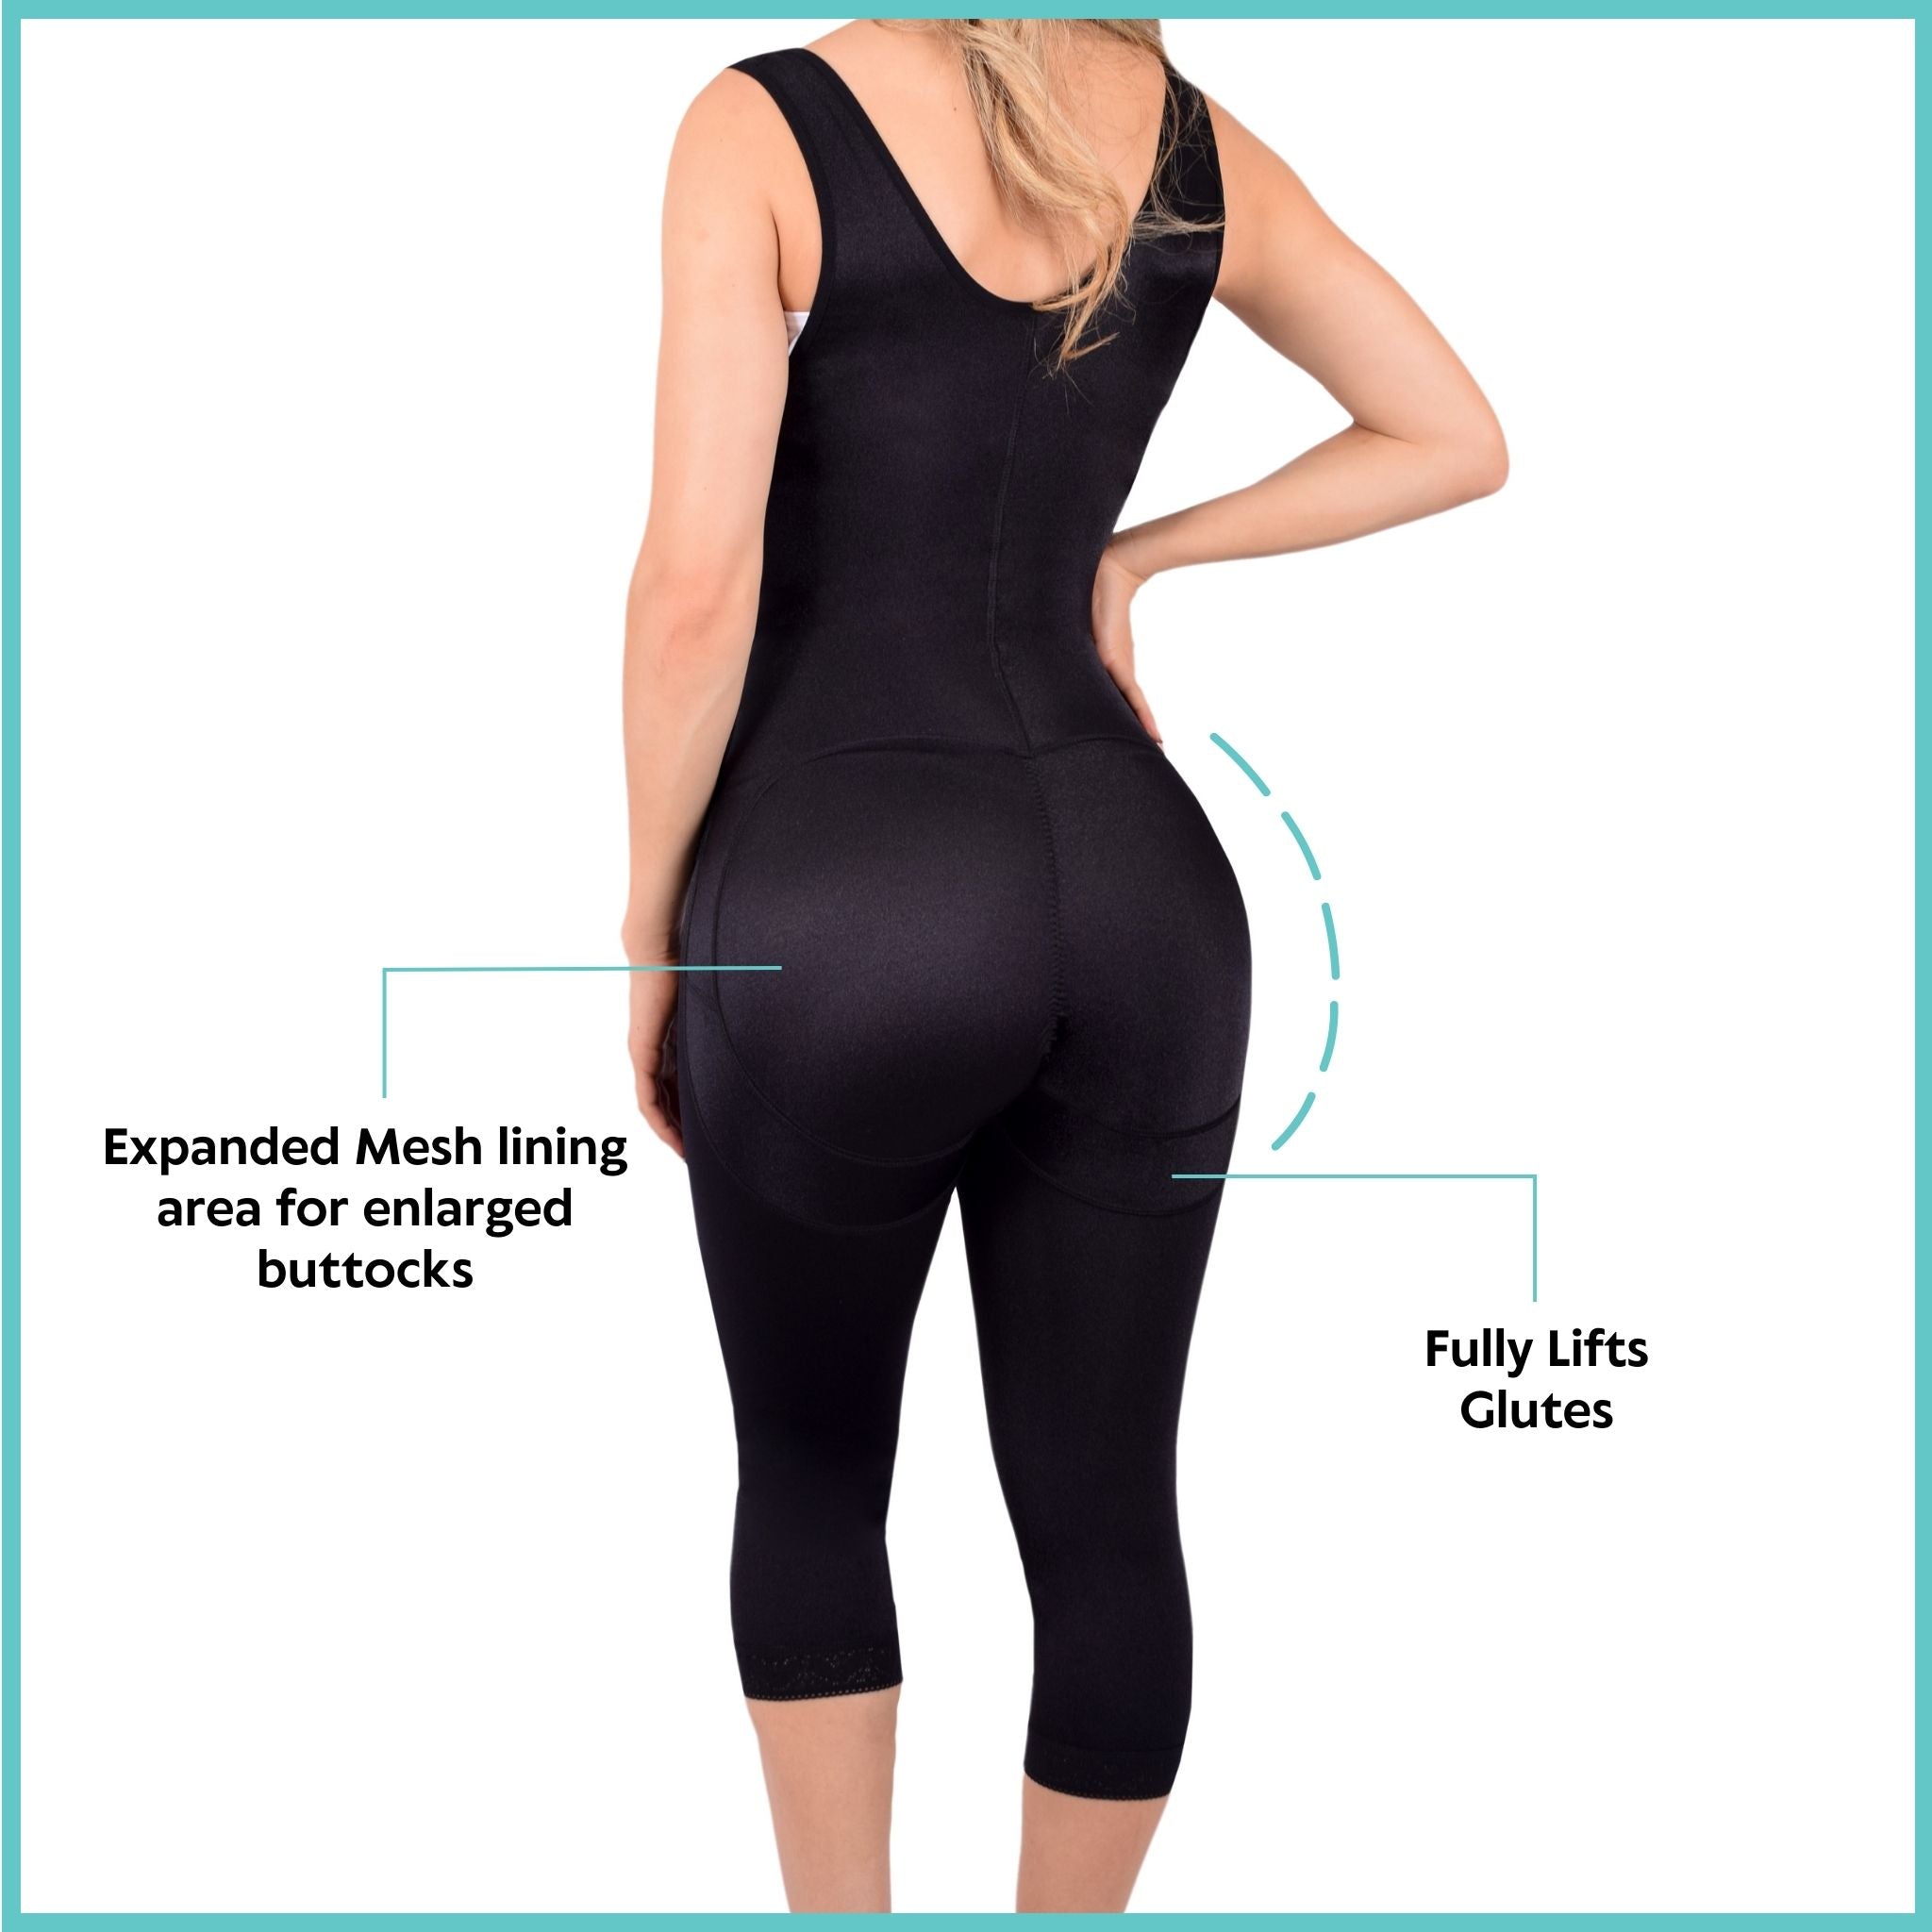 Post Liposuction/Burn Compression Garments From Above Knee To Under Breast  at Rs 1500/piece, Sector 9, Gurgaon